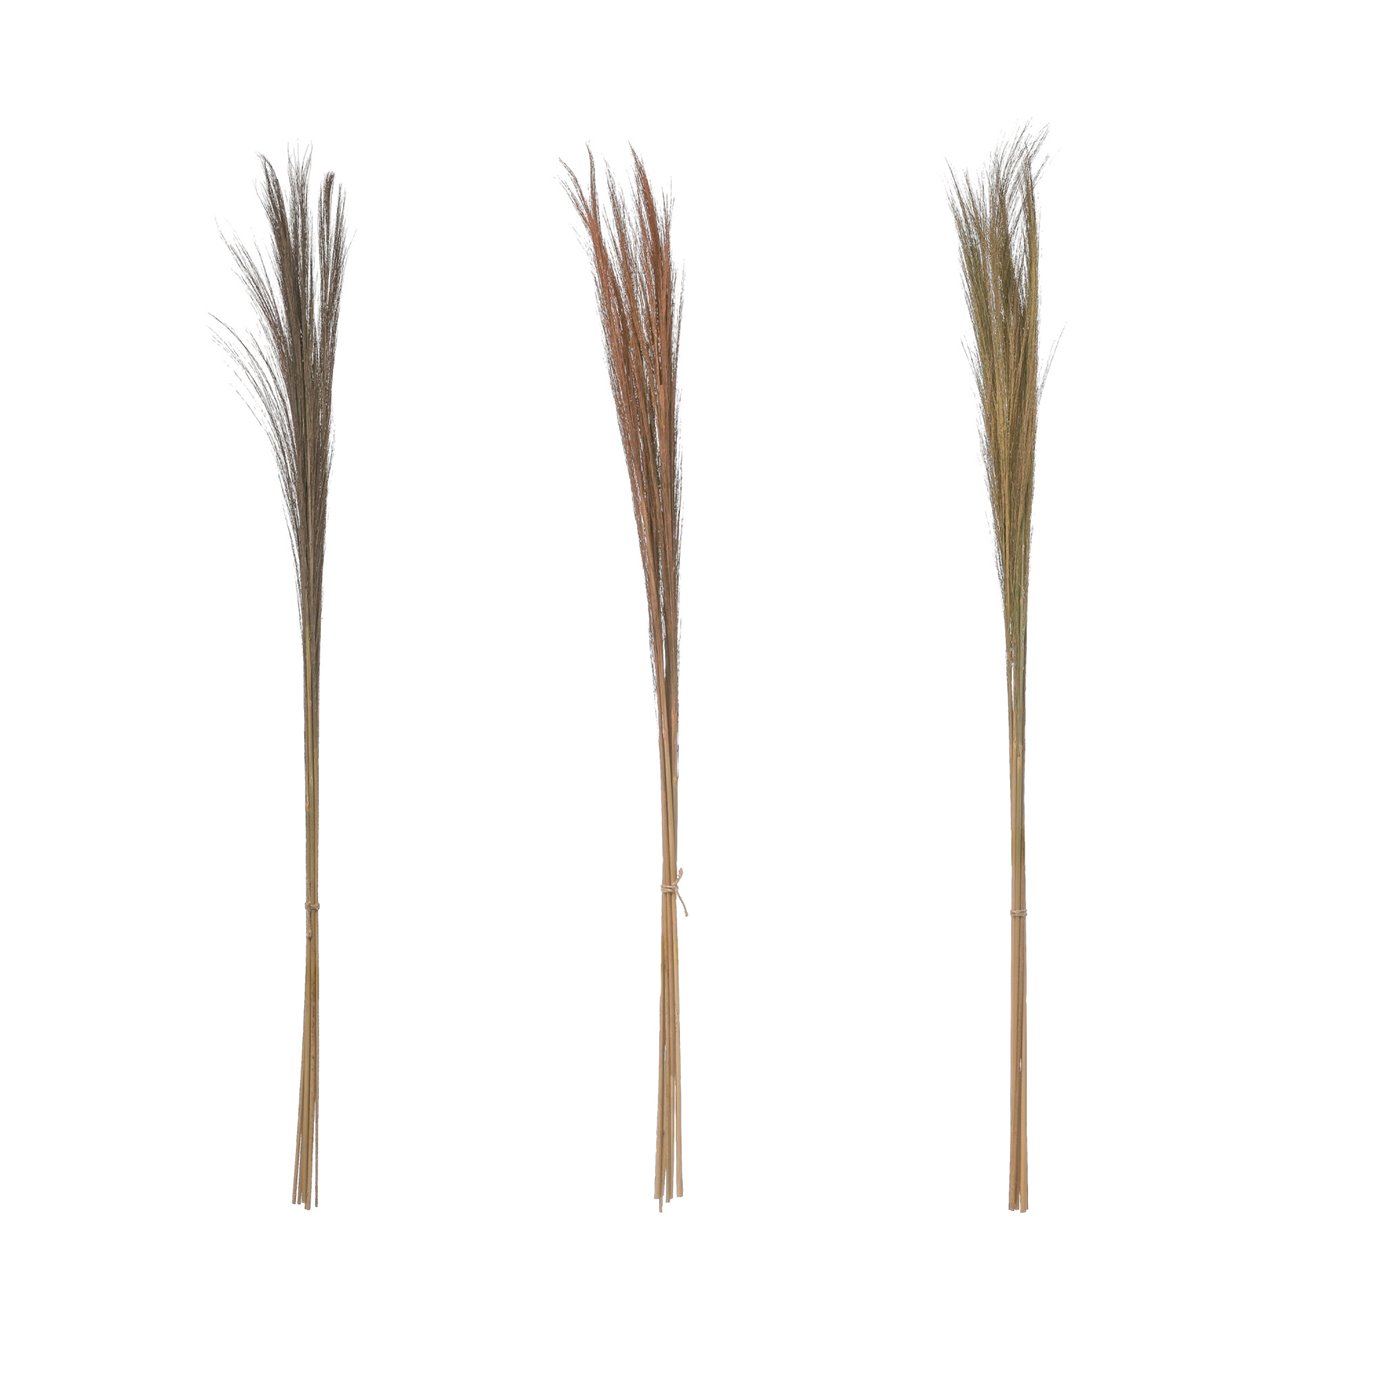 55"H Dried Natural Feather Grass Bunch (Set of 3 Colors)